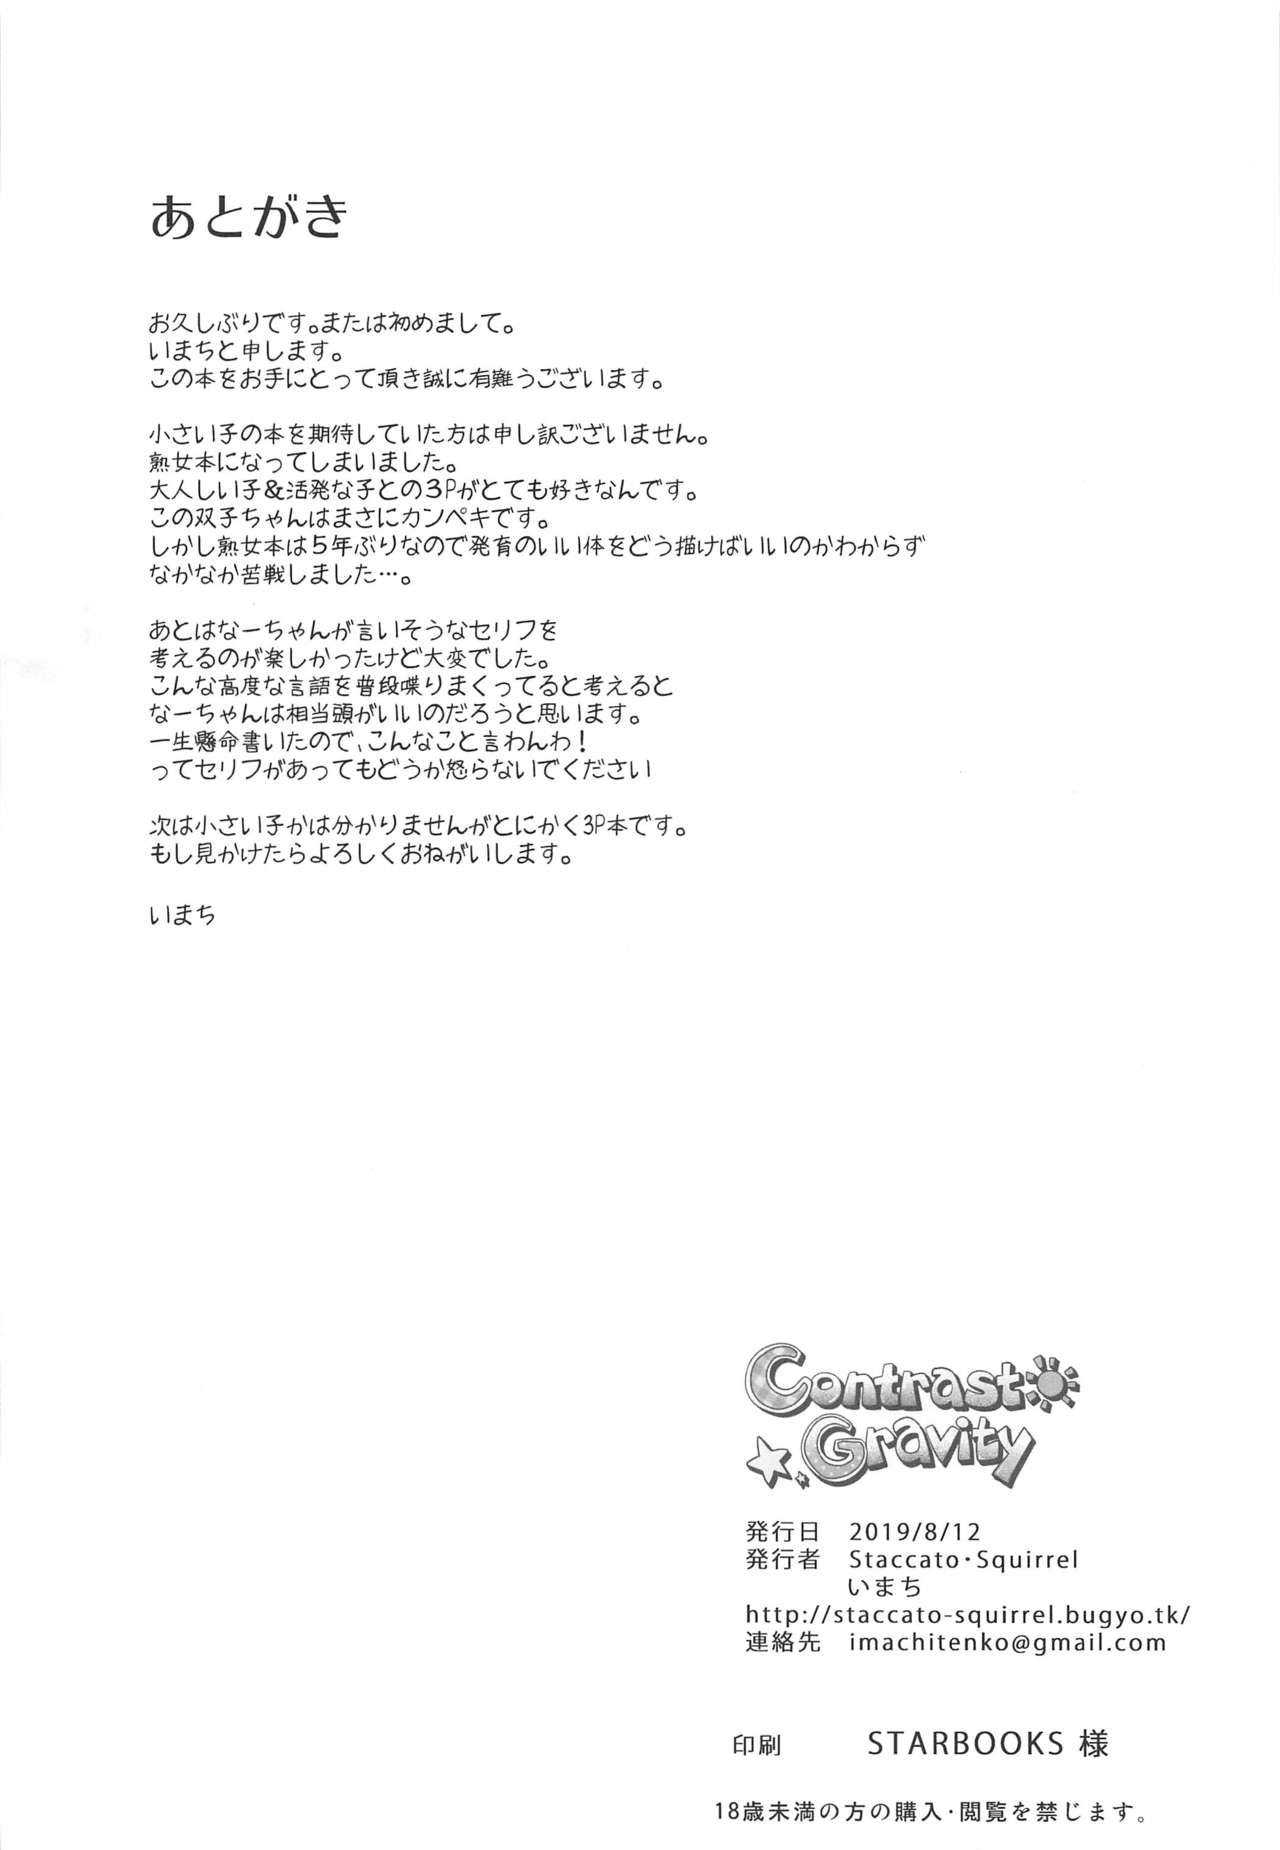 (C96) [Staccato・Squirrel (Imachi)] Contrast Gravity (THE IDOLM@STER CINDERELLA GIRLS) page 29 full